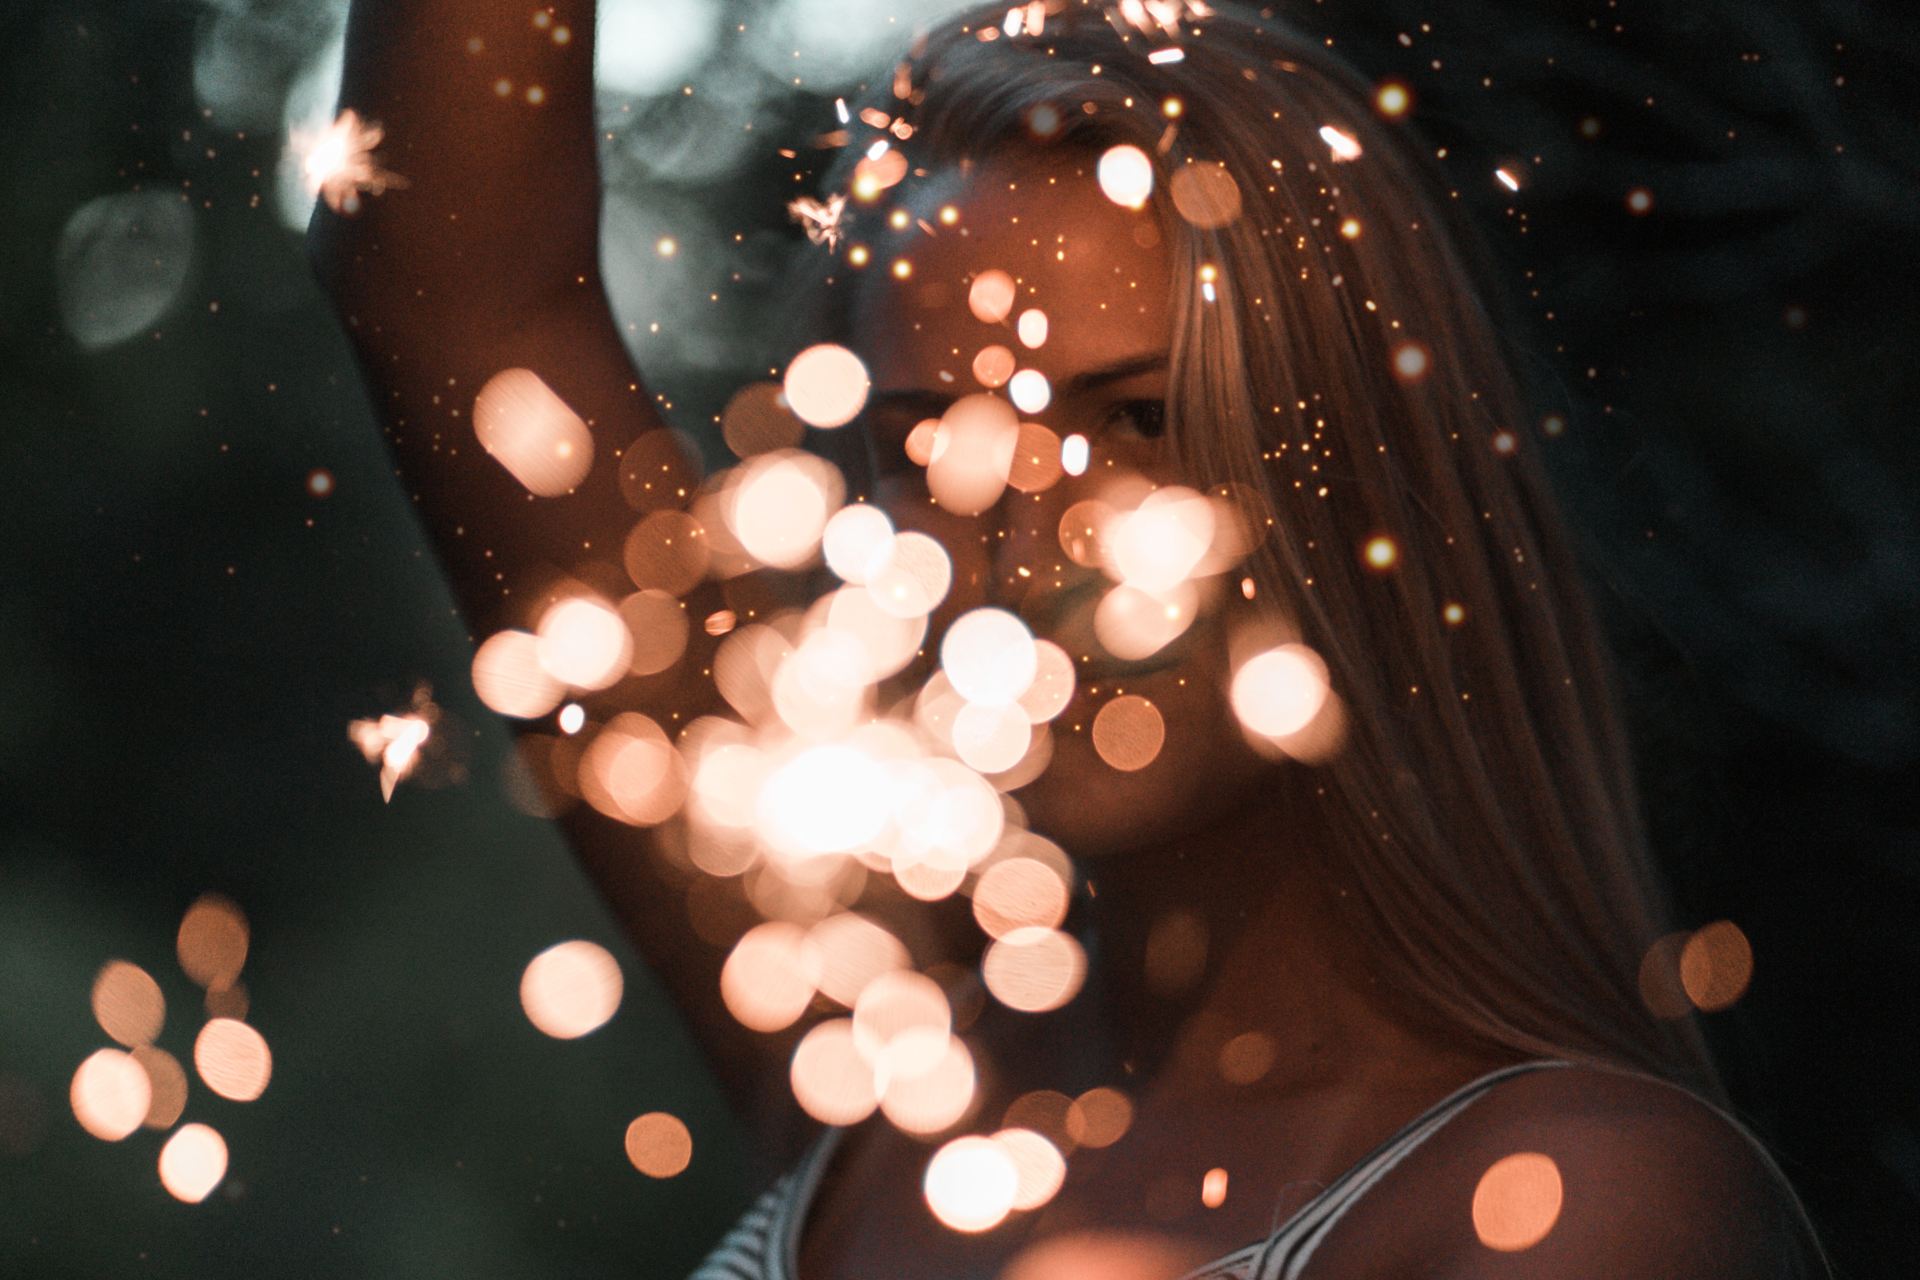 woman holding sparklers bokeh photography